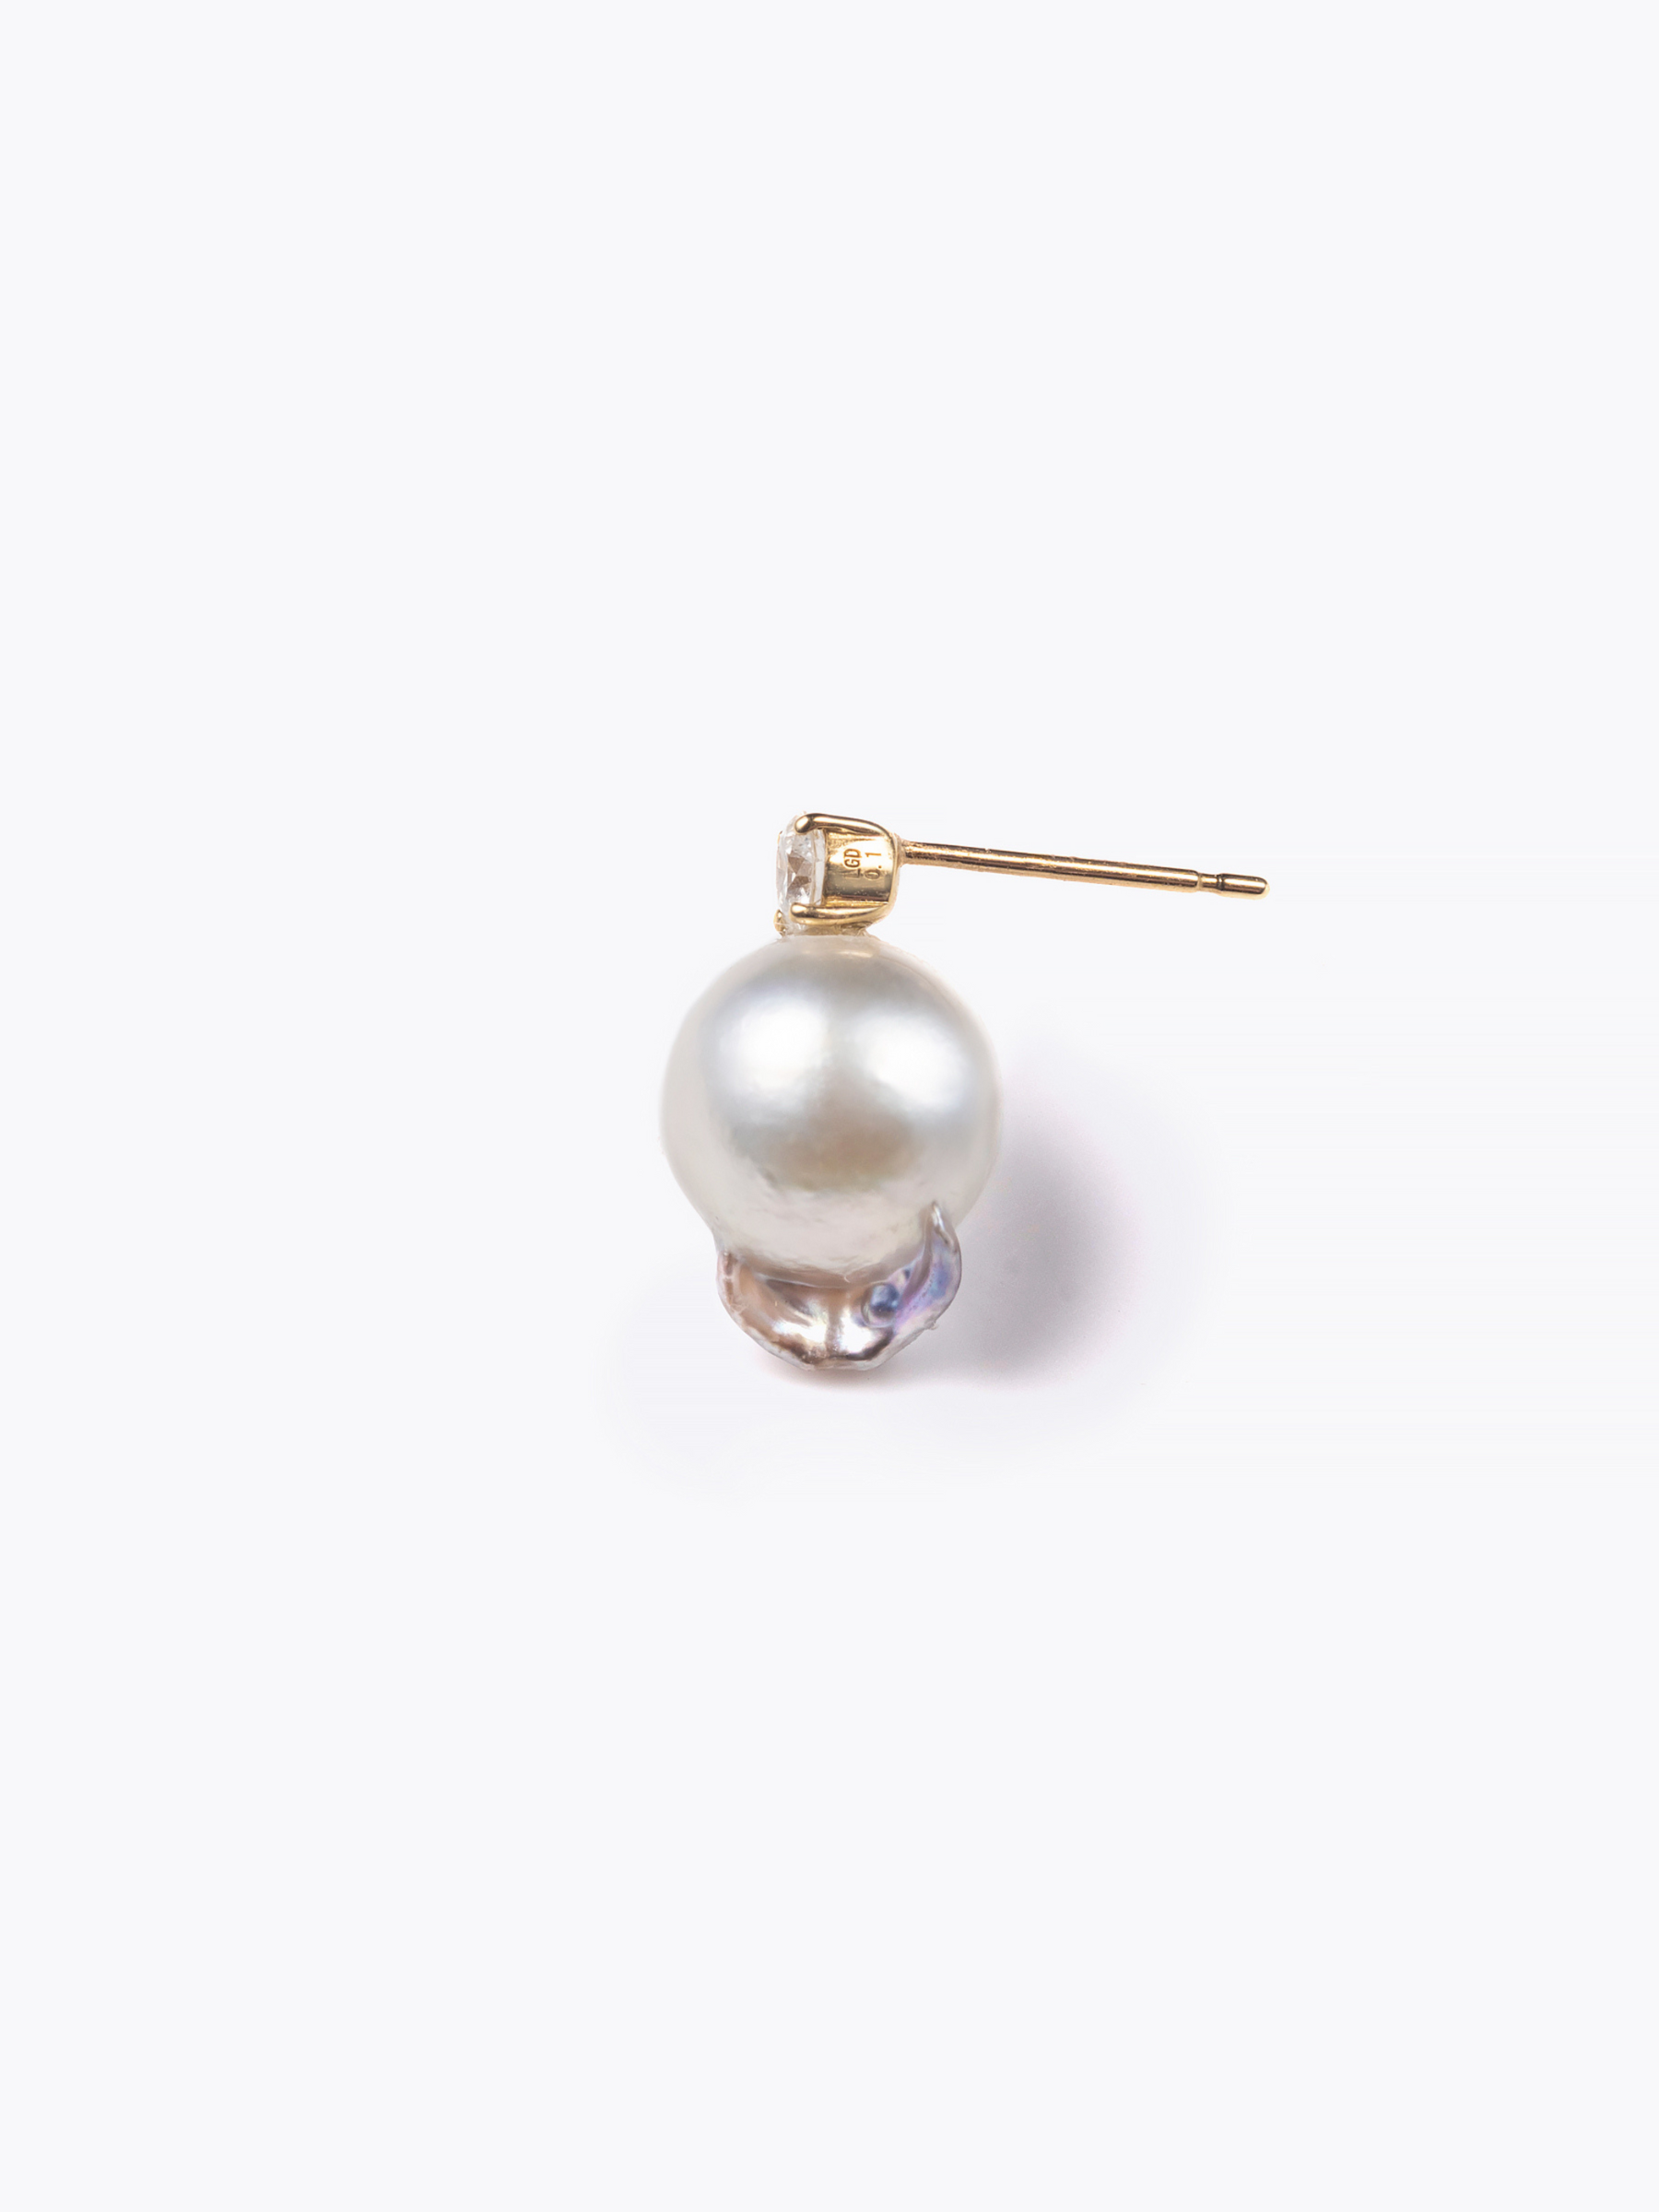 [Unique Akoya Pearl] Yamashita pearl point earrings (pair) Quick Delivery